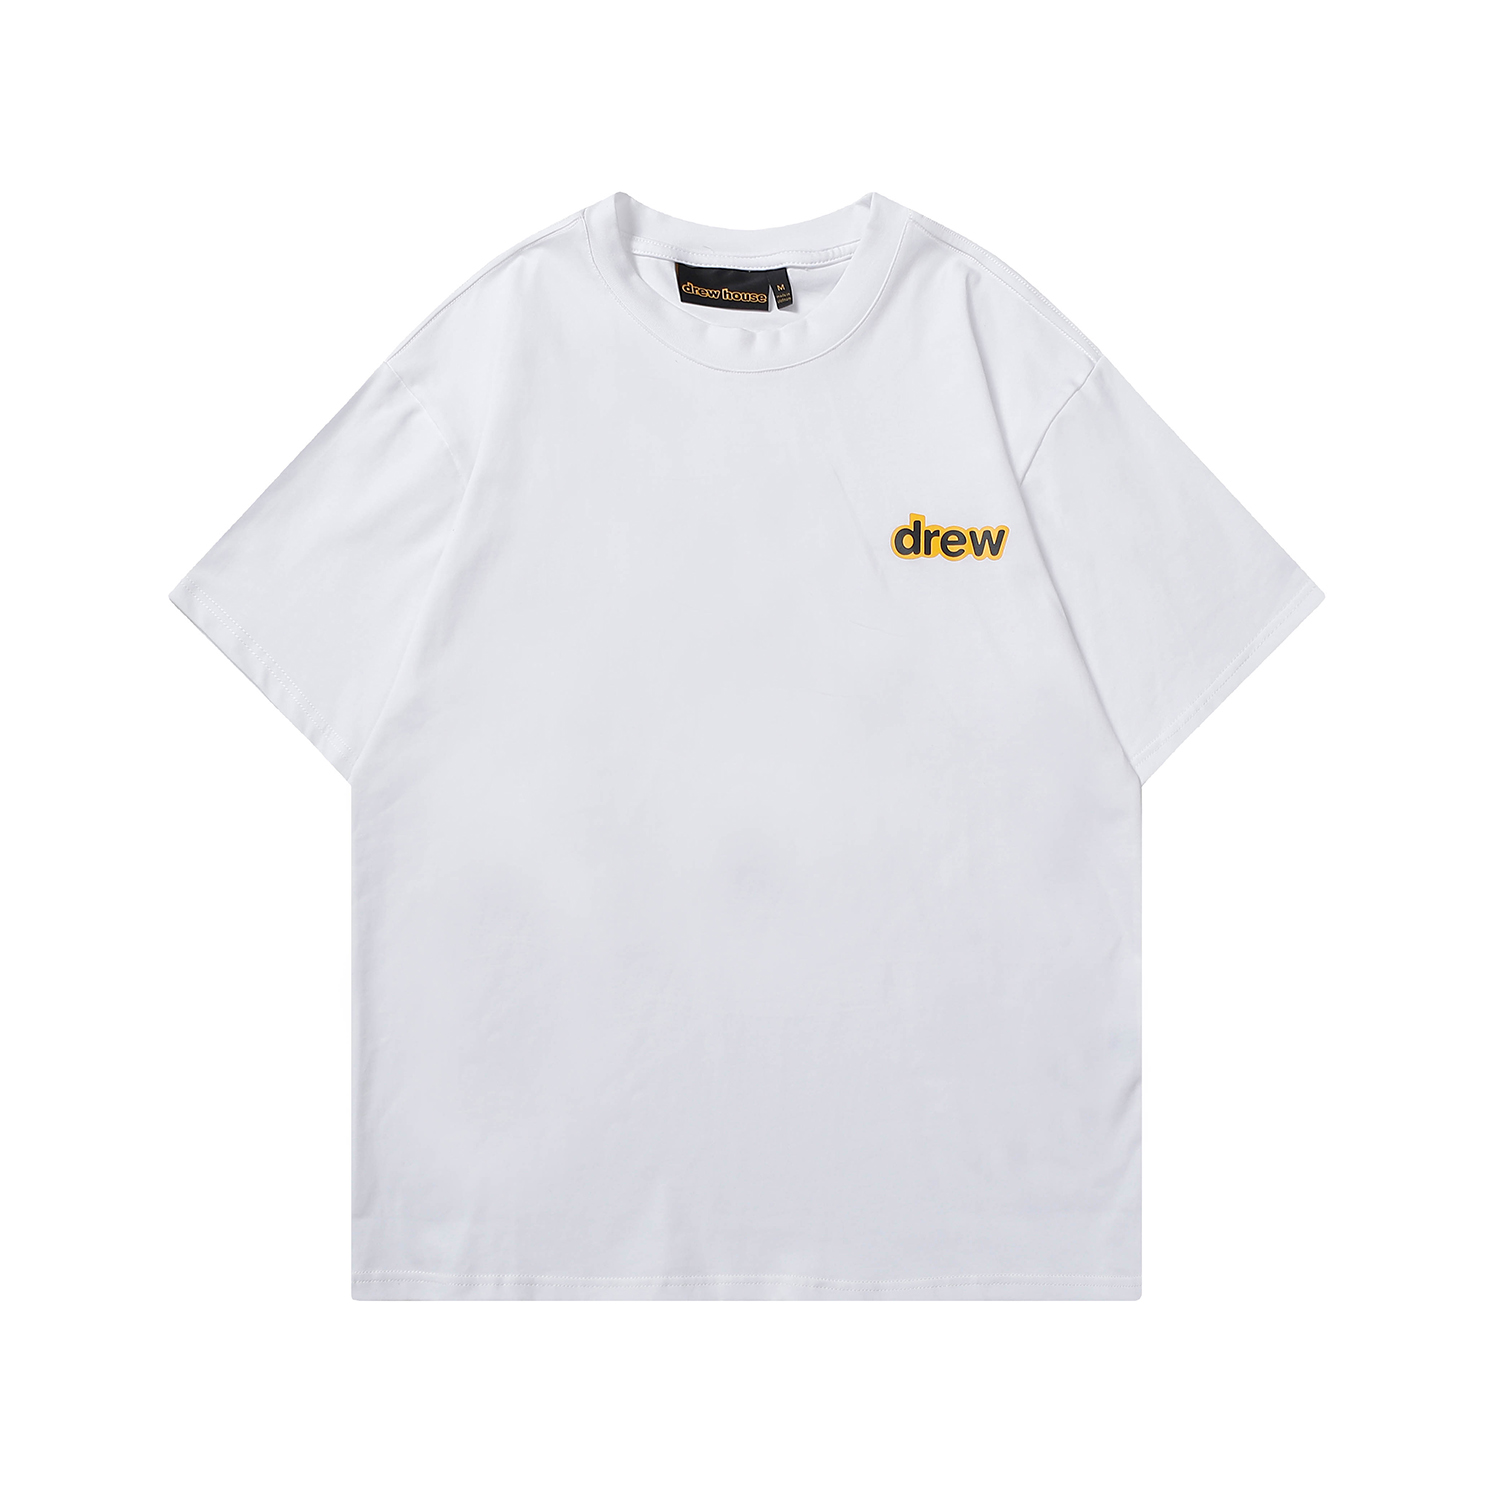 Drew House Clothing T-Shirt Best Replica 1:1
 White Printing Cotton Double Yarn